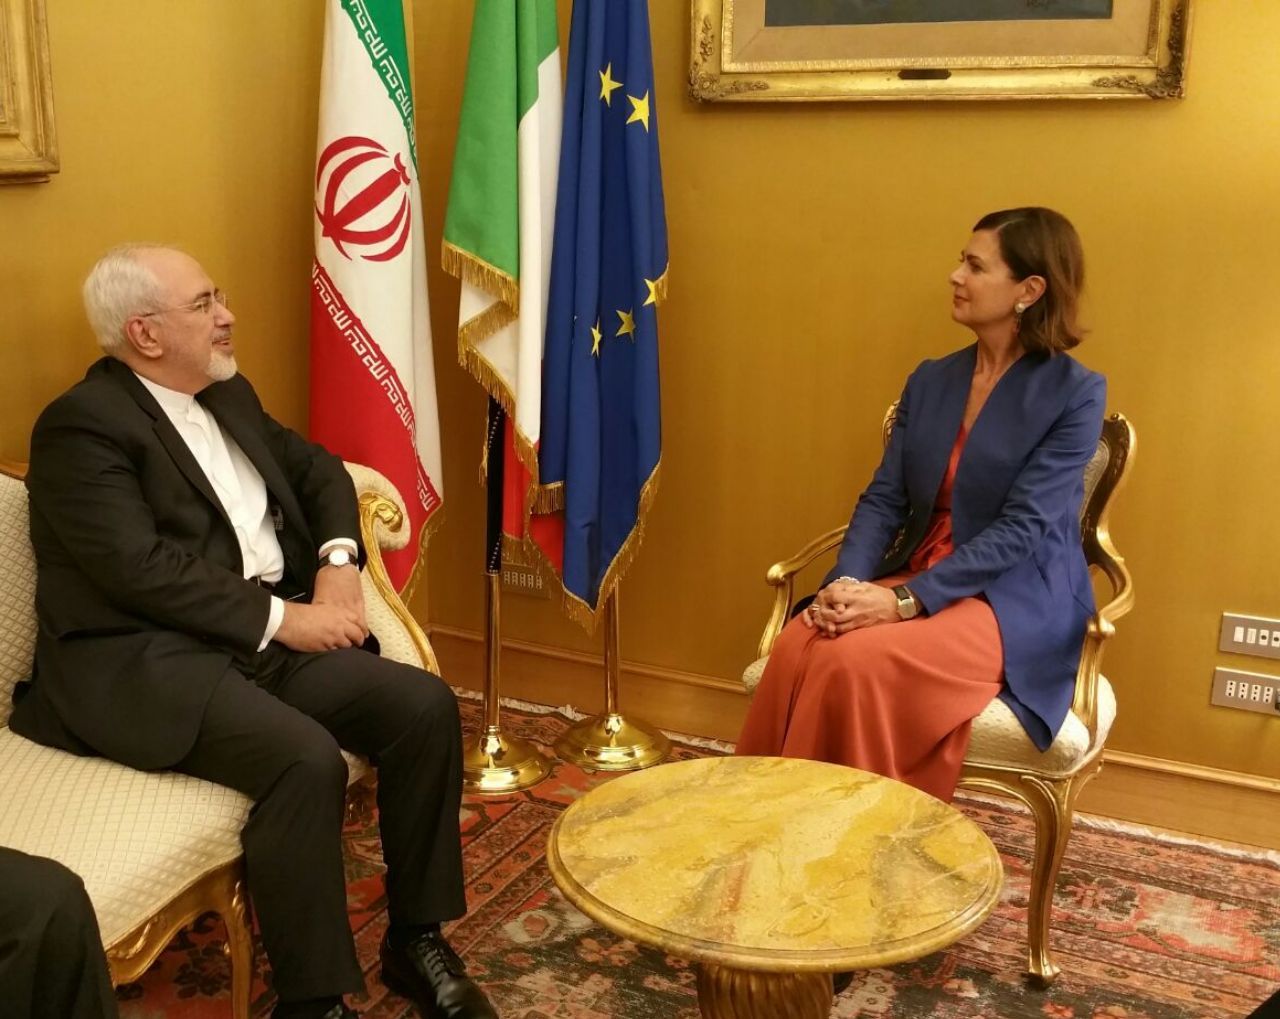 Iran FM Holds Talks with Top Italian Officials in Rome